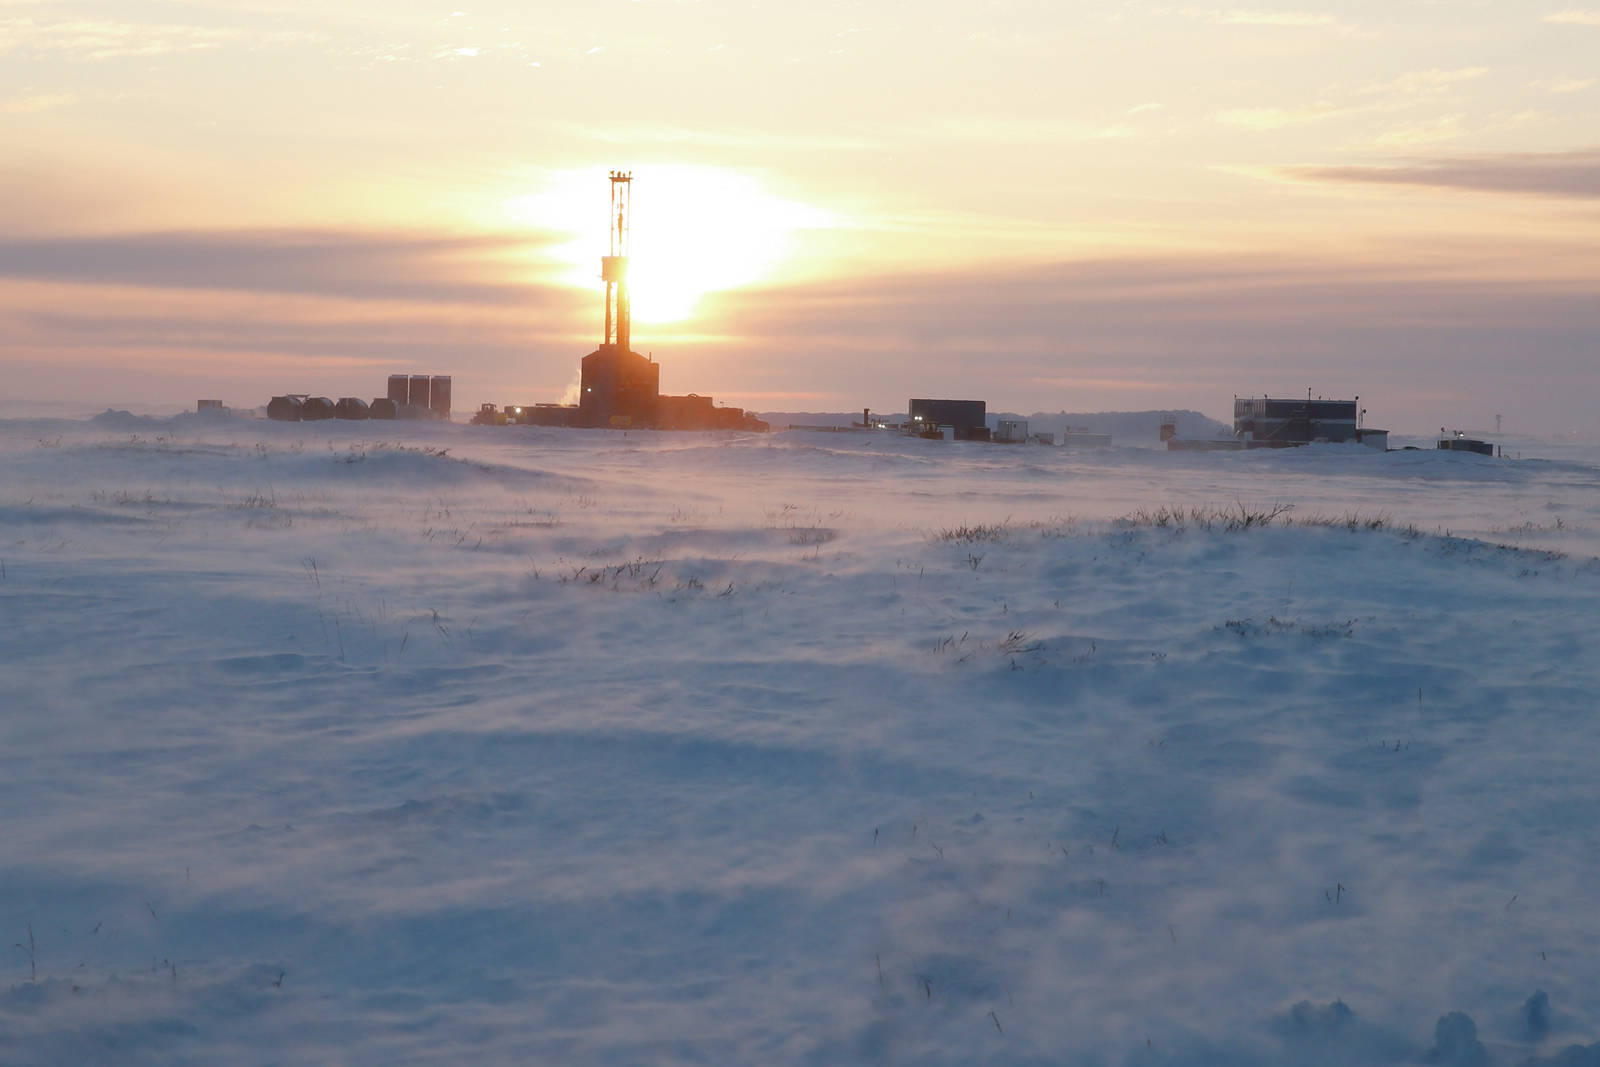 The Kuukpik 5 rig is seen at sunset while drilling the ConocoPhillips’ Putu well south of Nuiqsut in mid-February 2018. (Photo/Judy Patrick/ConocoPhillips)